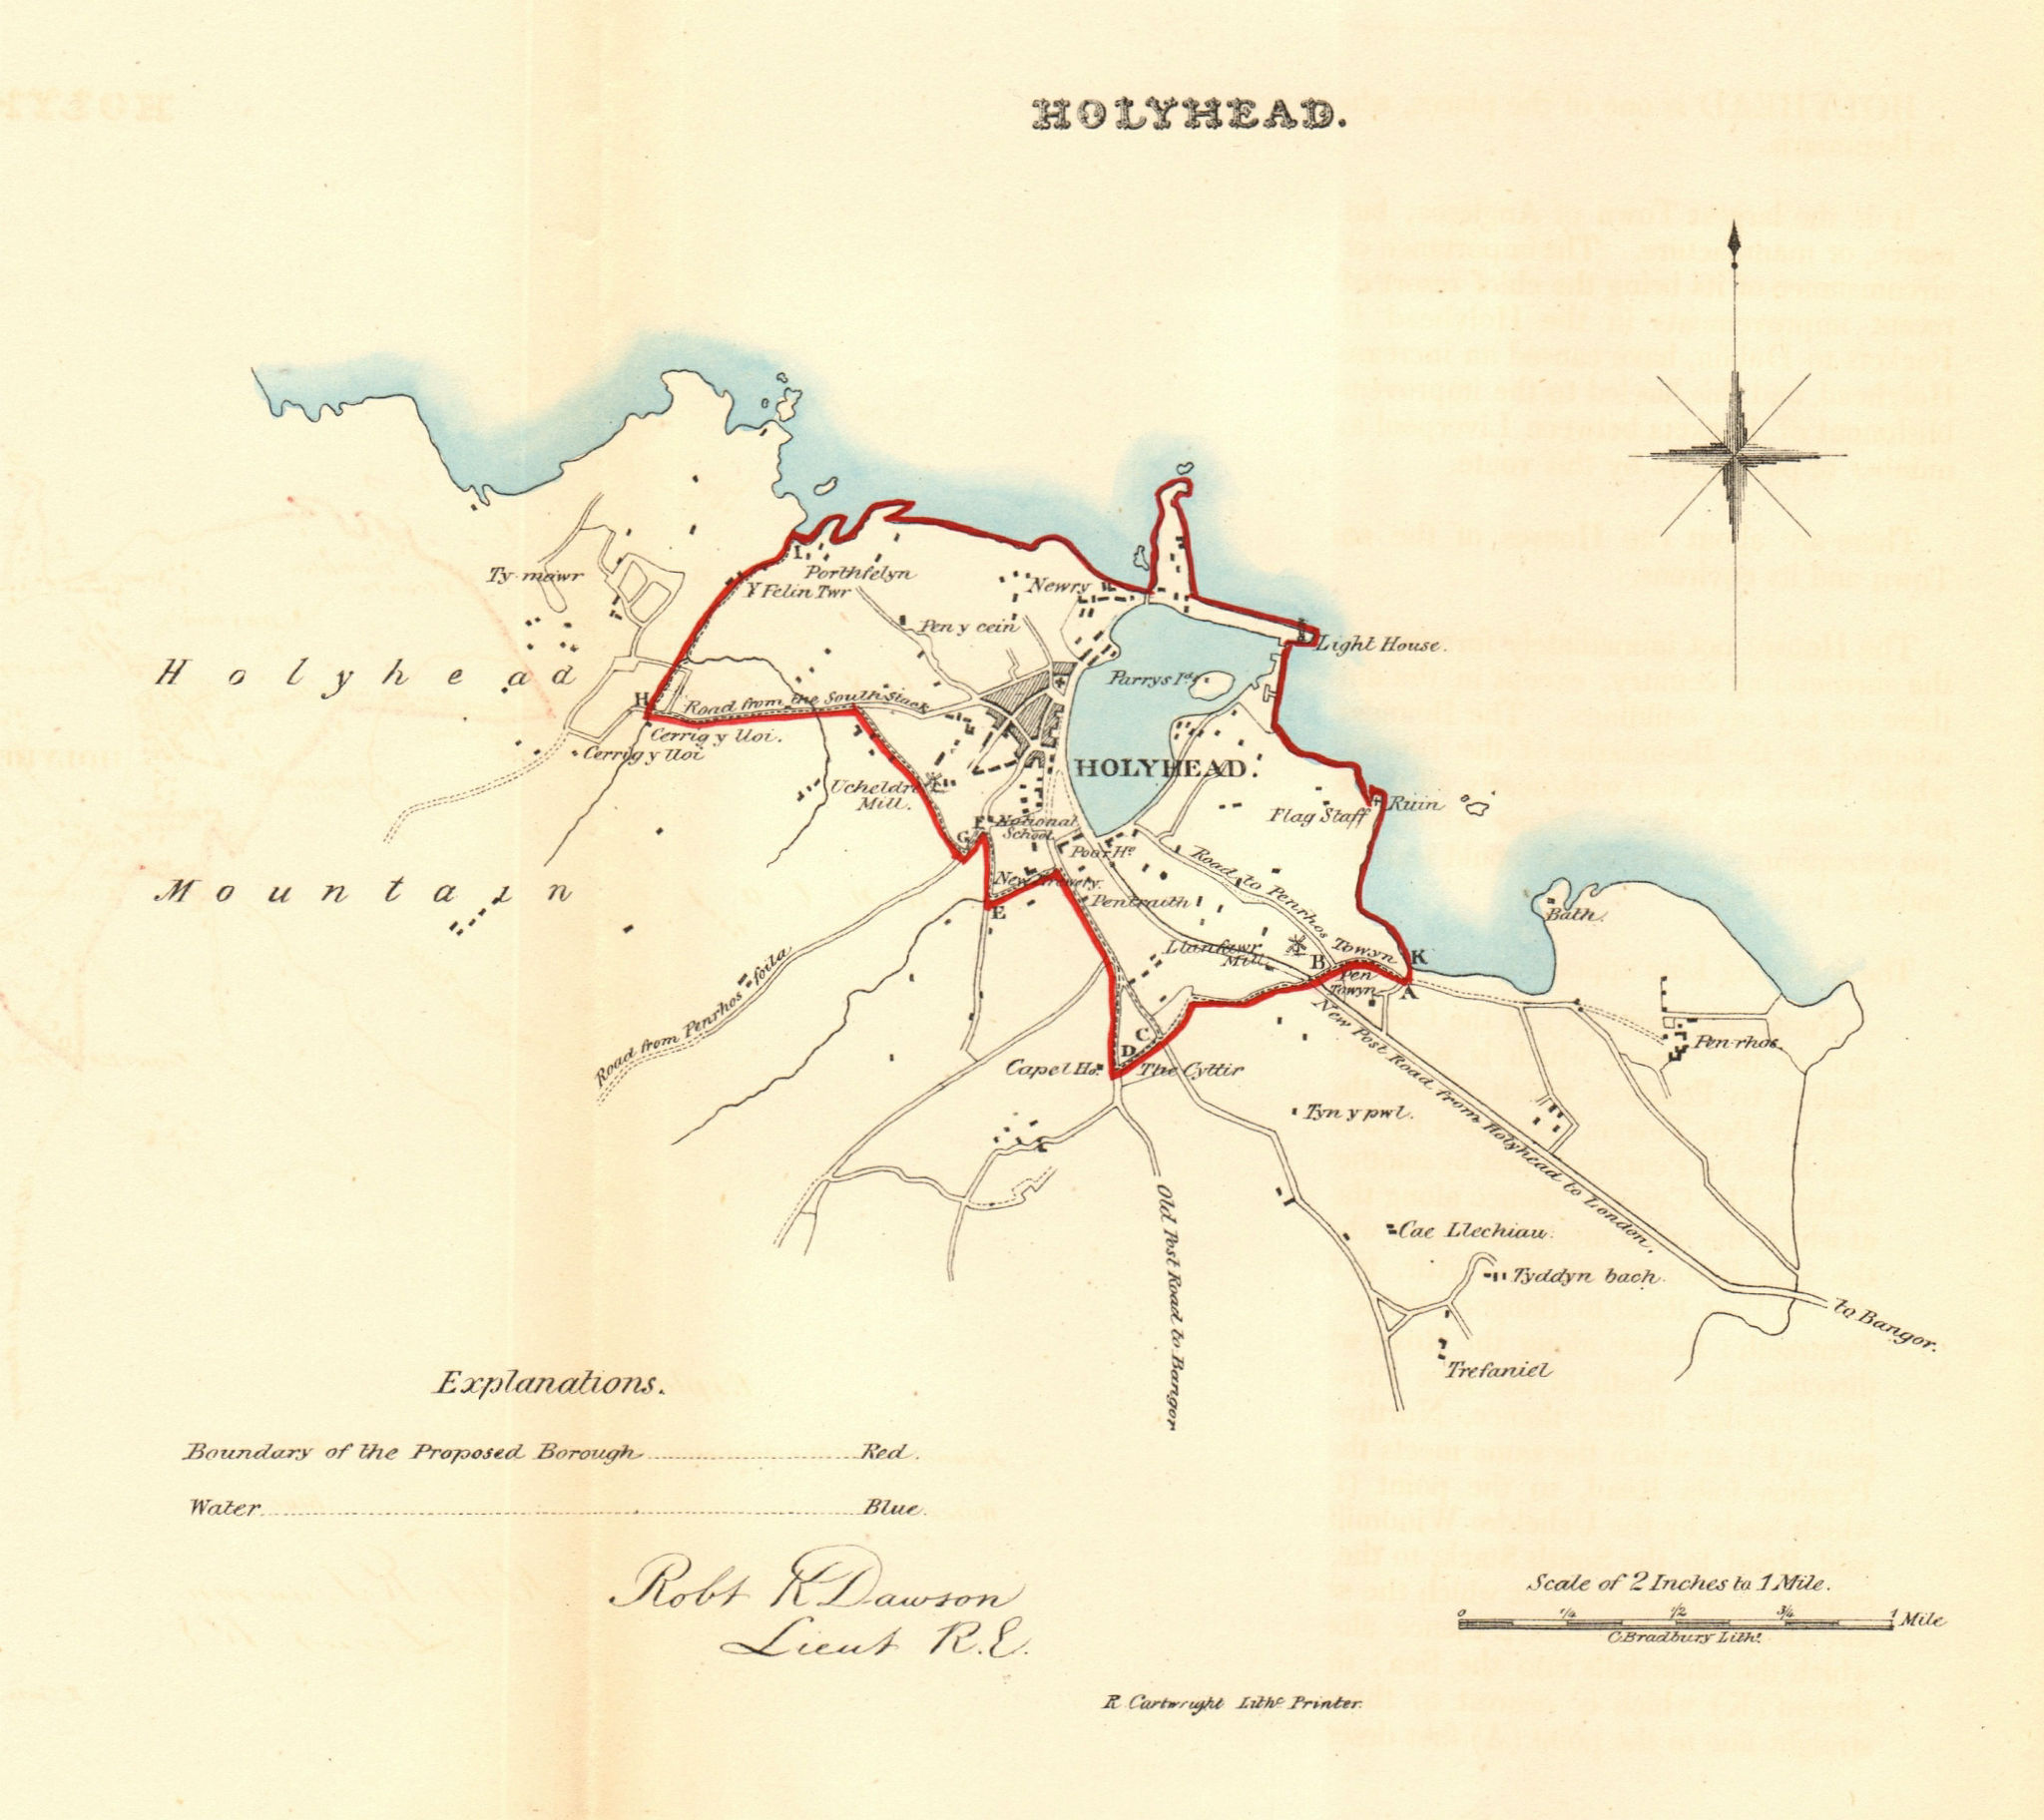 Associate Product HOLYHEAD/CAERGYBI borough/town plan for the REFORM ACT. Wales. DAWSON 1832 map